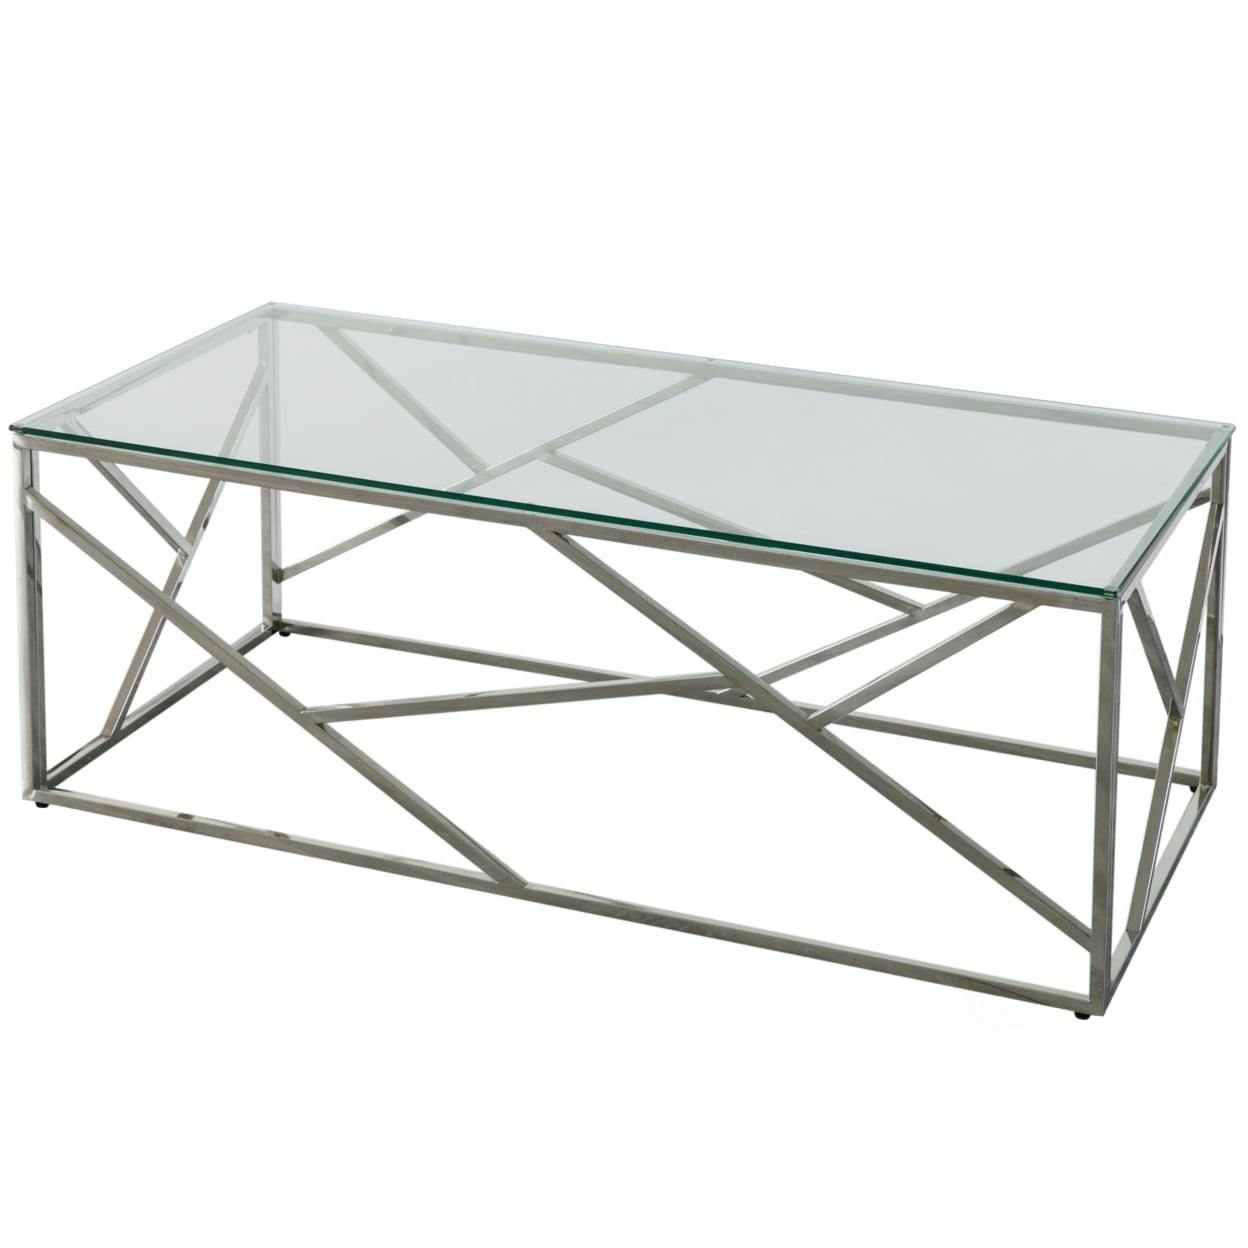 Elegant Rectangular Glass & Polished Stainless Steel Coffee Table